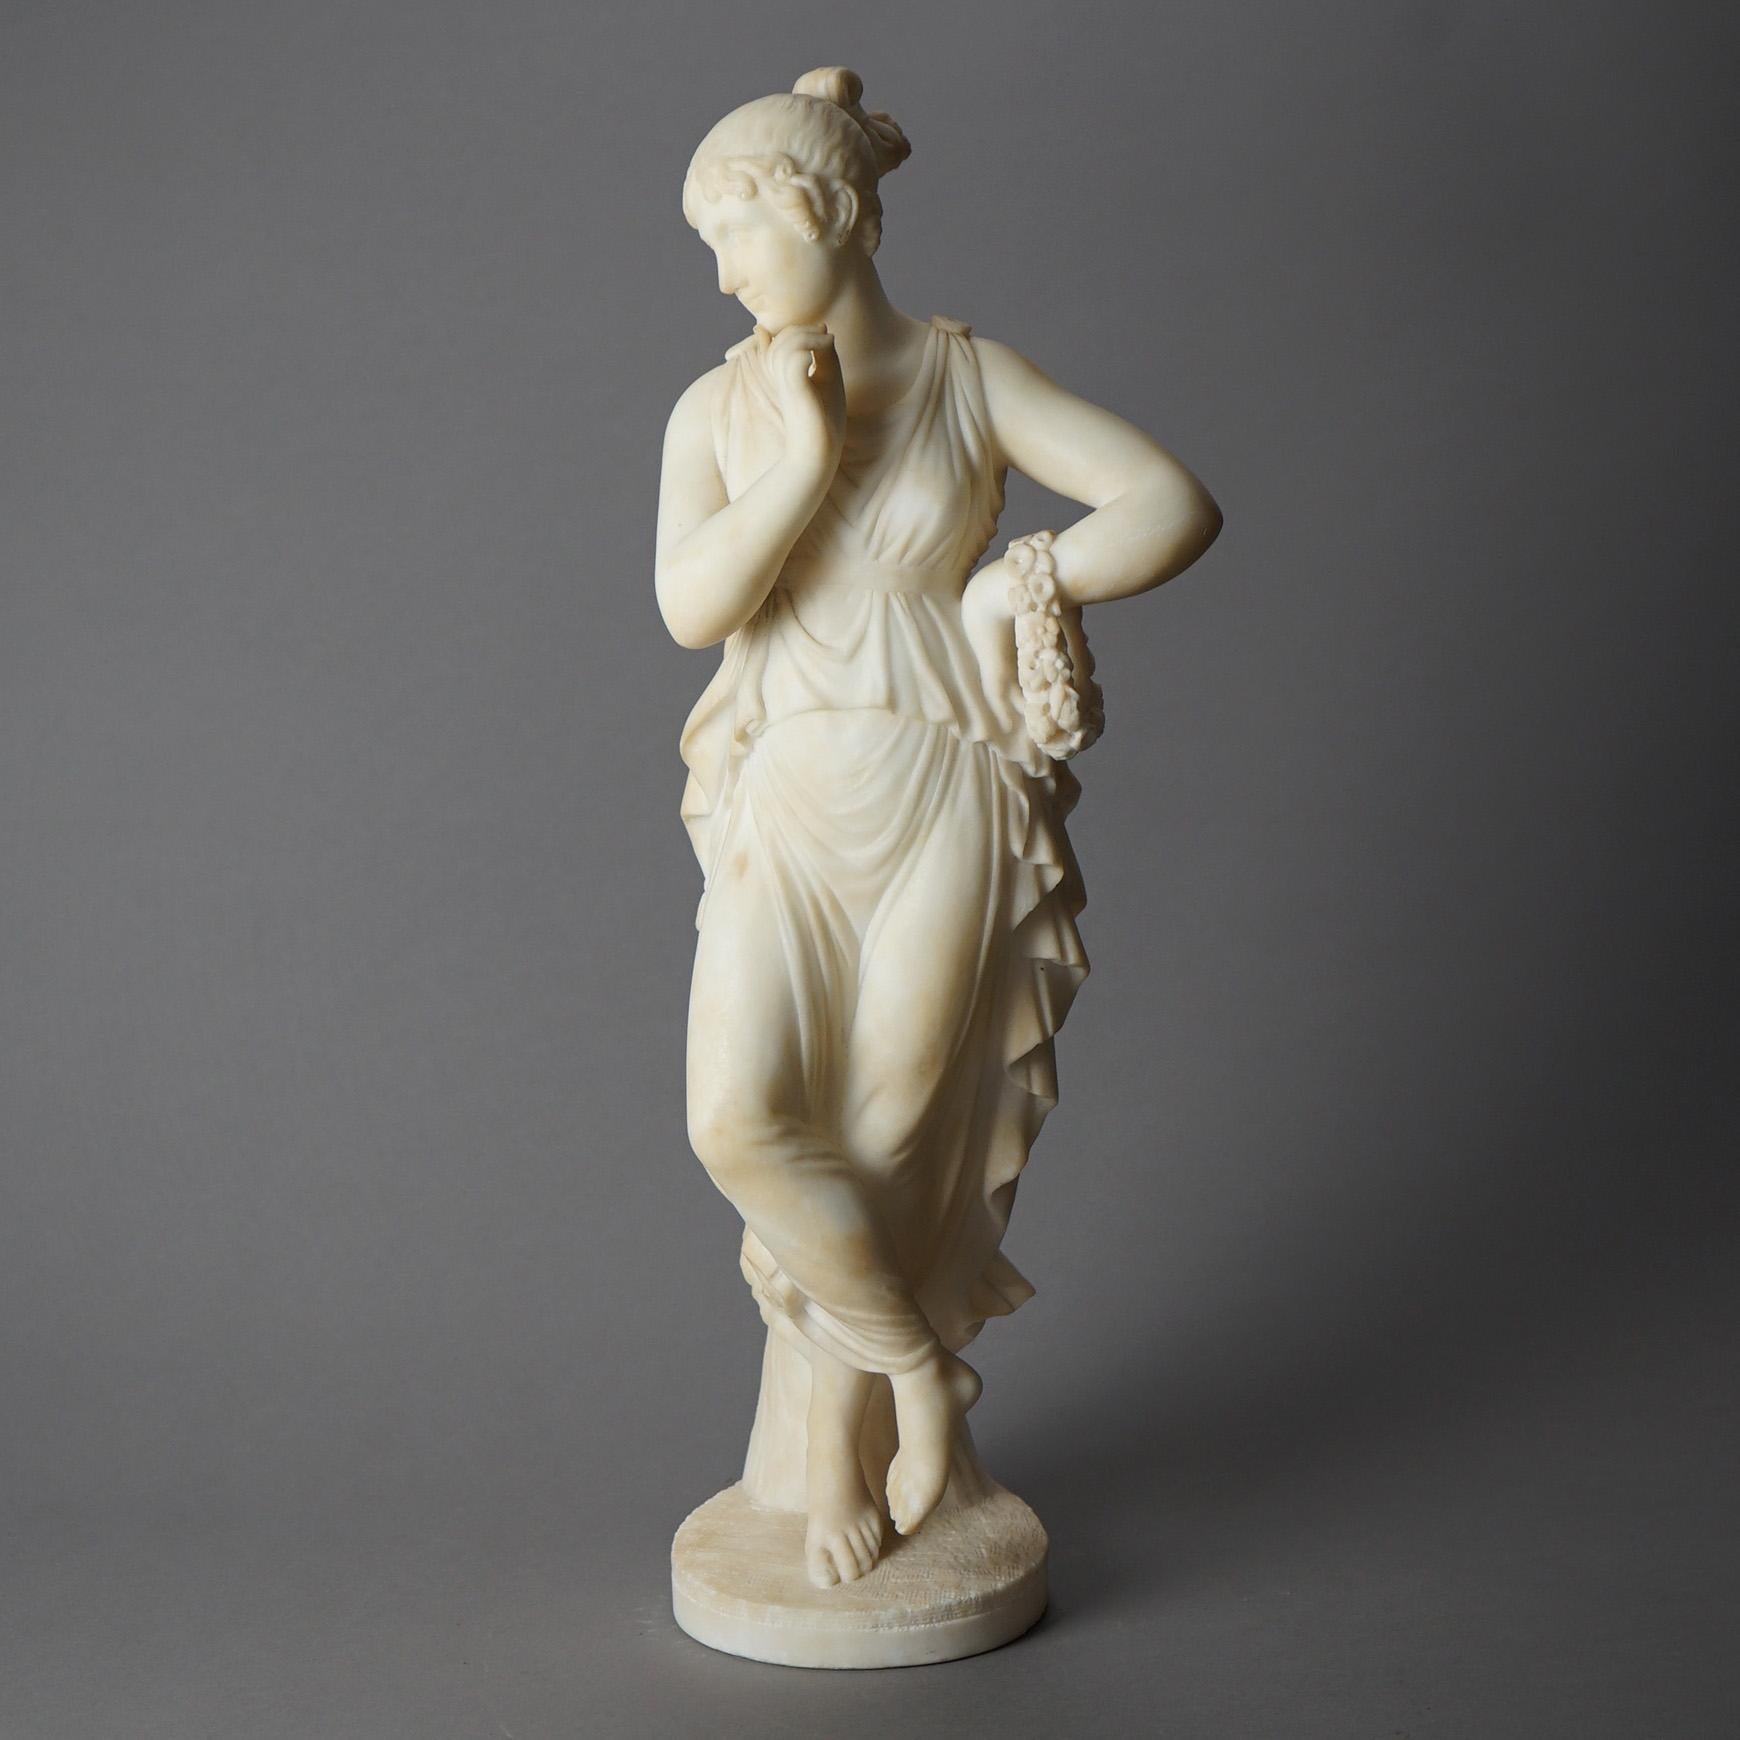 Antique Italian figurative sculpture signed P. Bazzanti, Florence offers carved alabaster Classical woman, artist signature as photographed, 19th century

Measures - 22